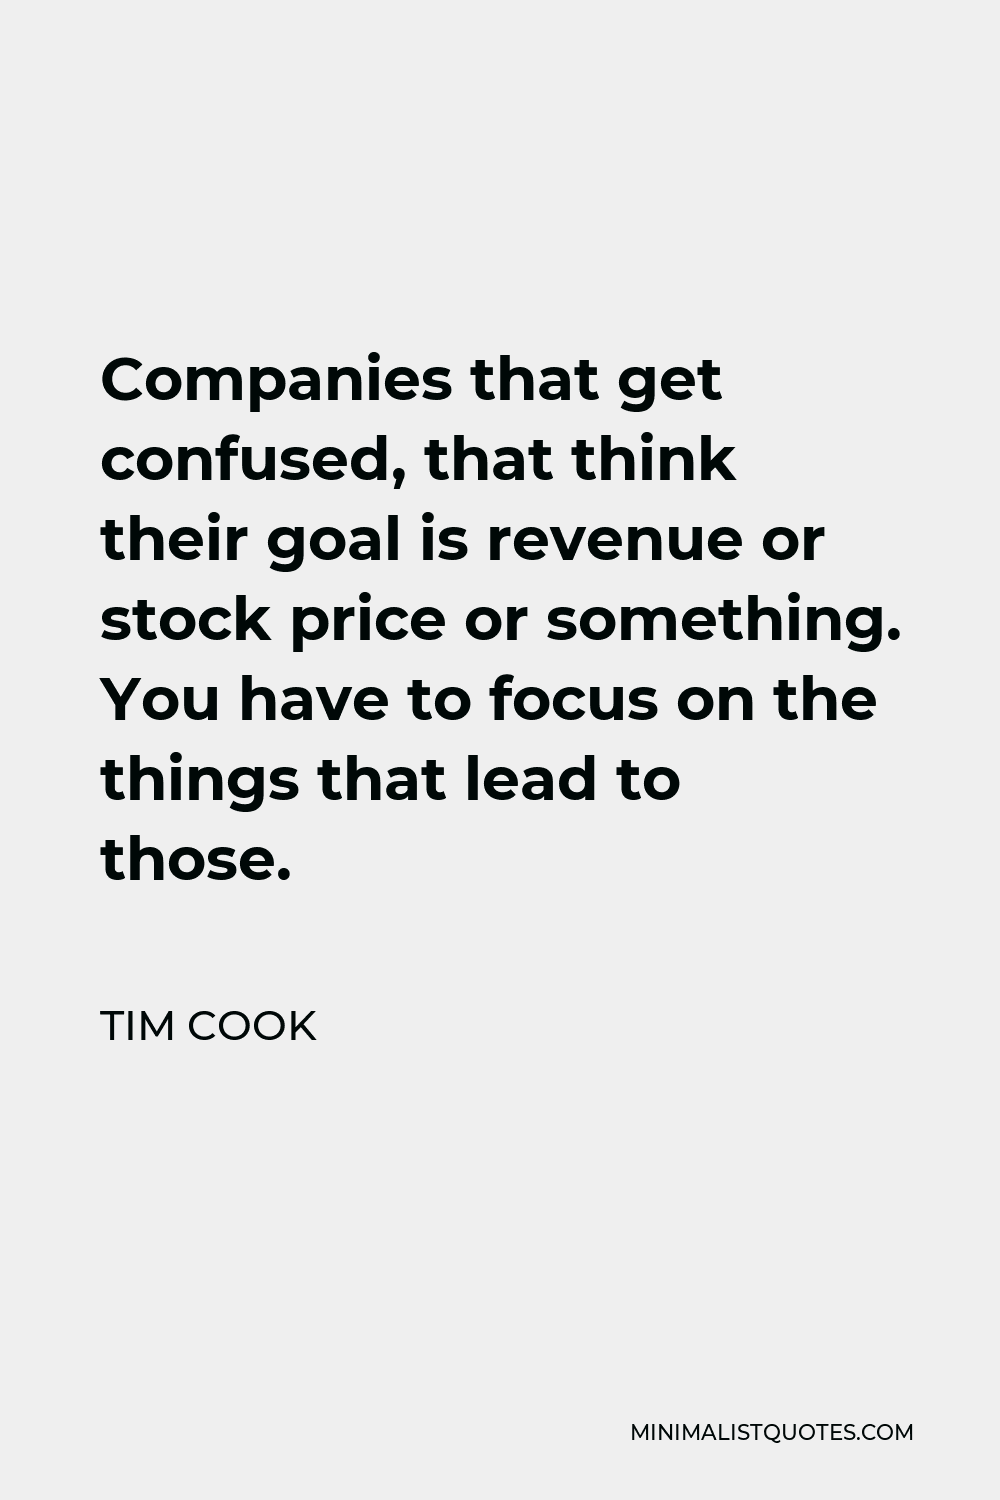 Tim Cook Quote - Companies that get confused, that think their goal is revenue or stock price or something. You have to focus on the things that lead to those.